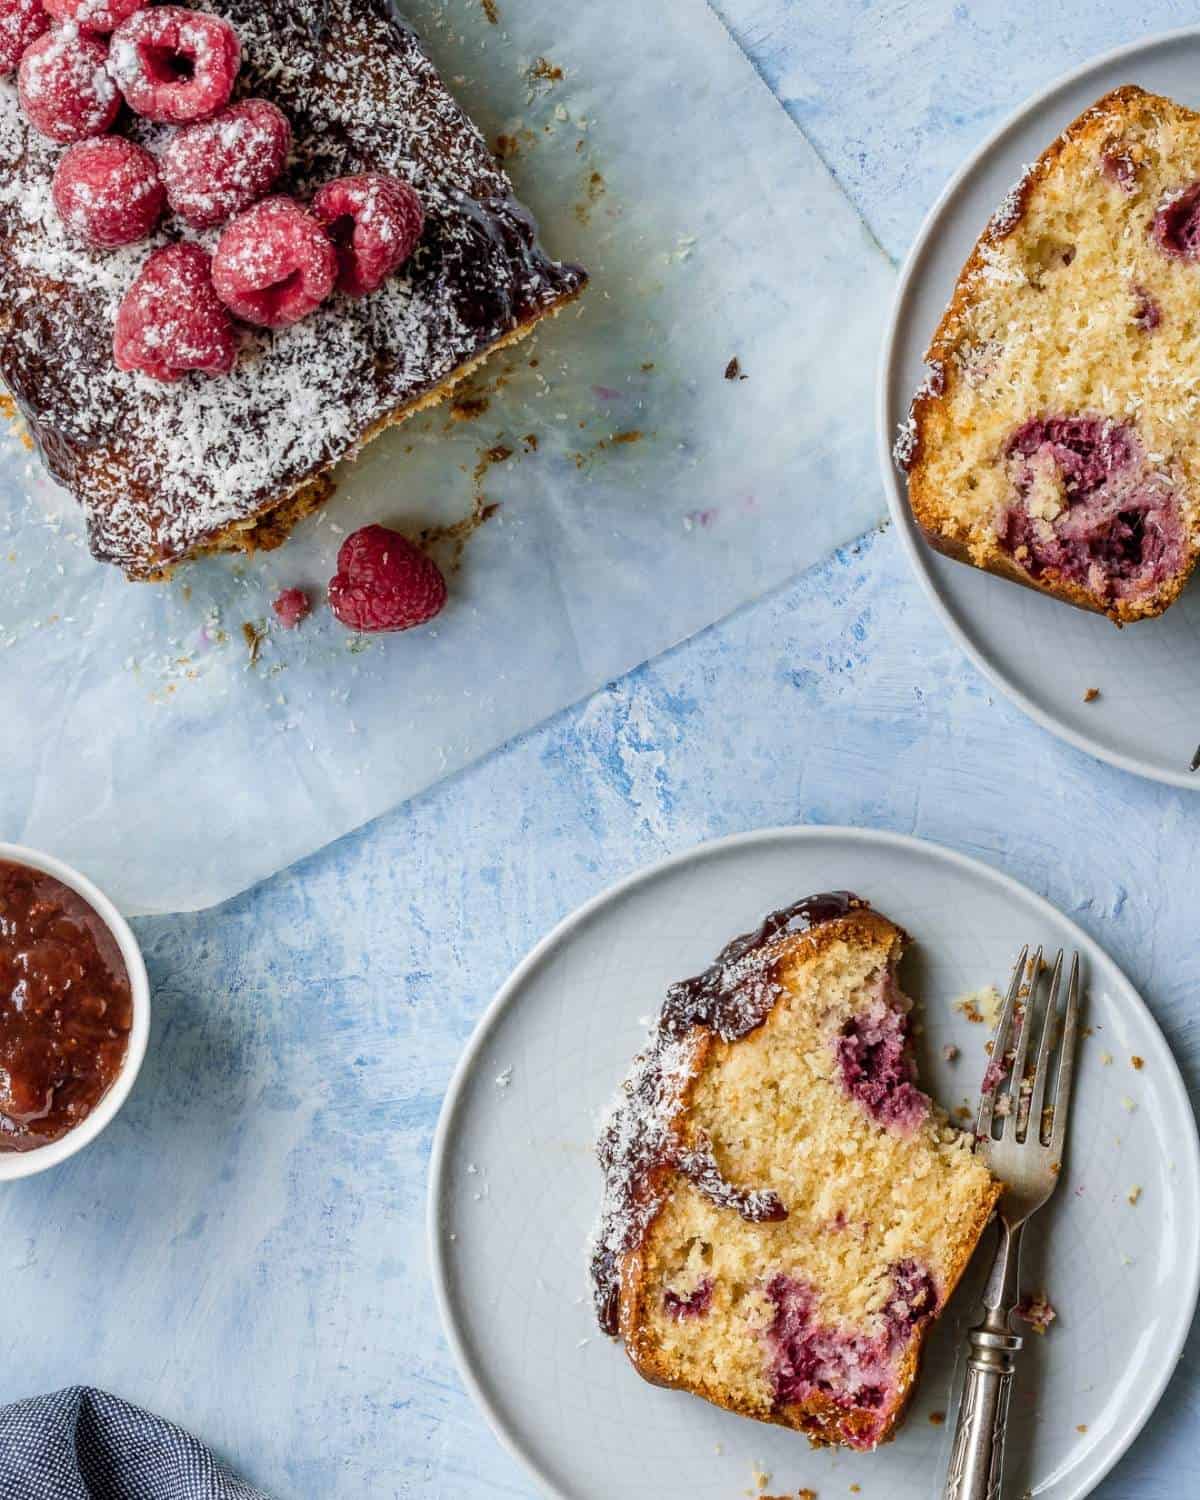 A-Conut-and-Raspberry-Loaf- showing-a-lot-of-Raspberry-on top-2 slices of-Loaf-with-lots-of-Raspberry-baked-inside-the-slices-are-on-light-blue-plates-with-fork-and-jam-raspberrie-aside